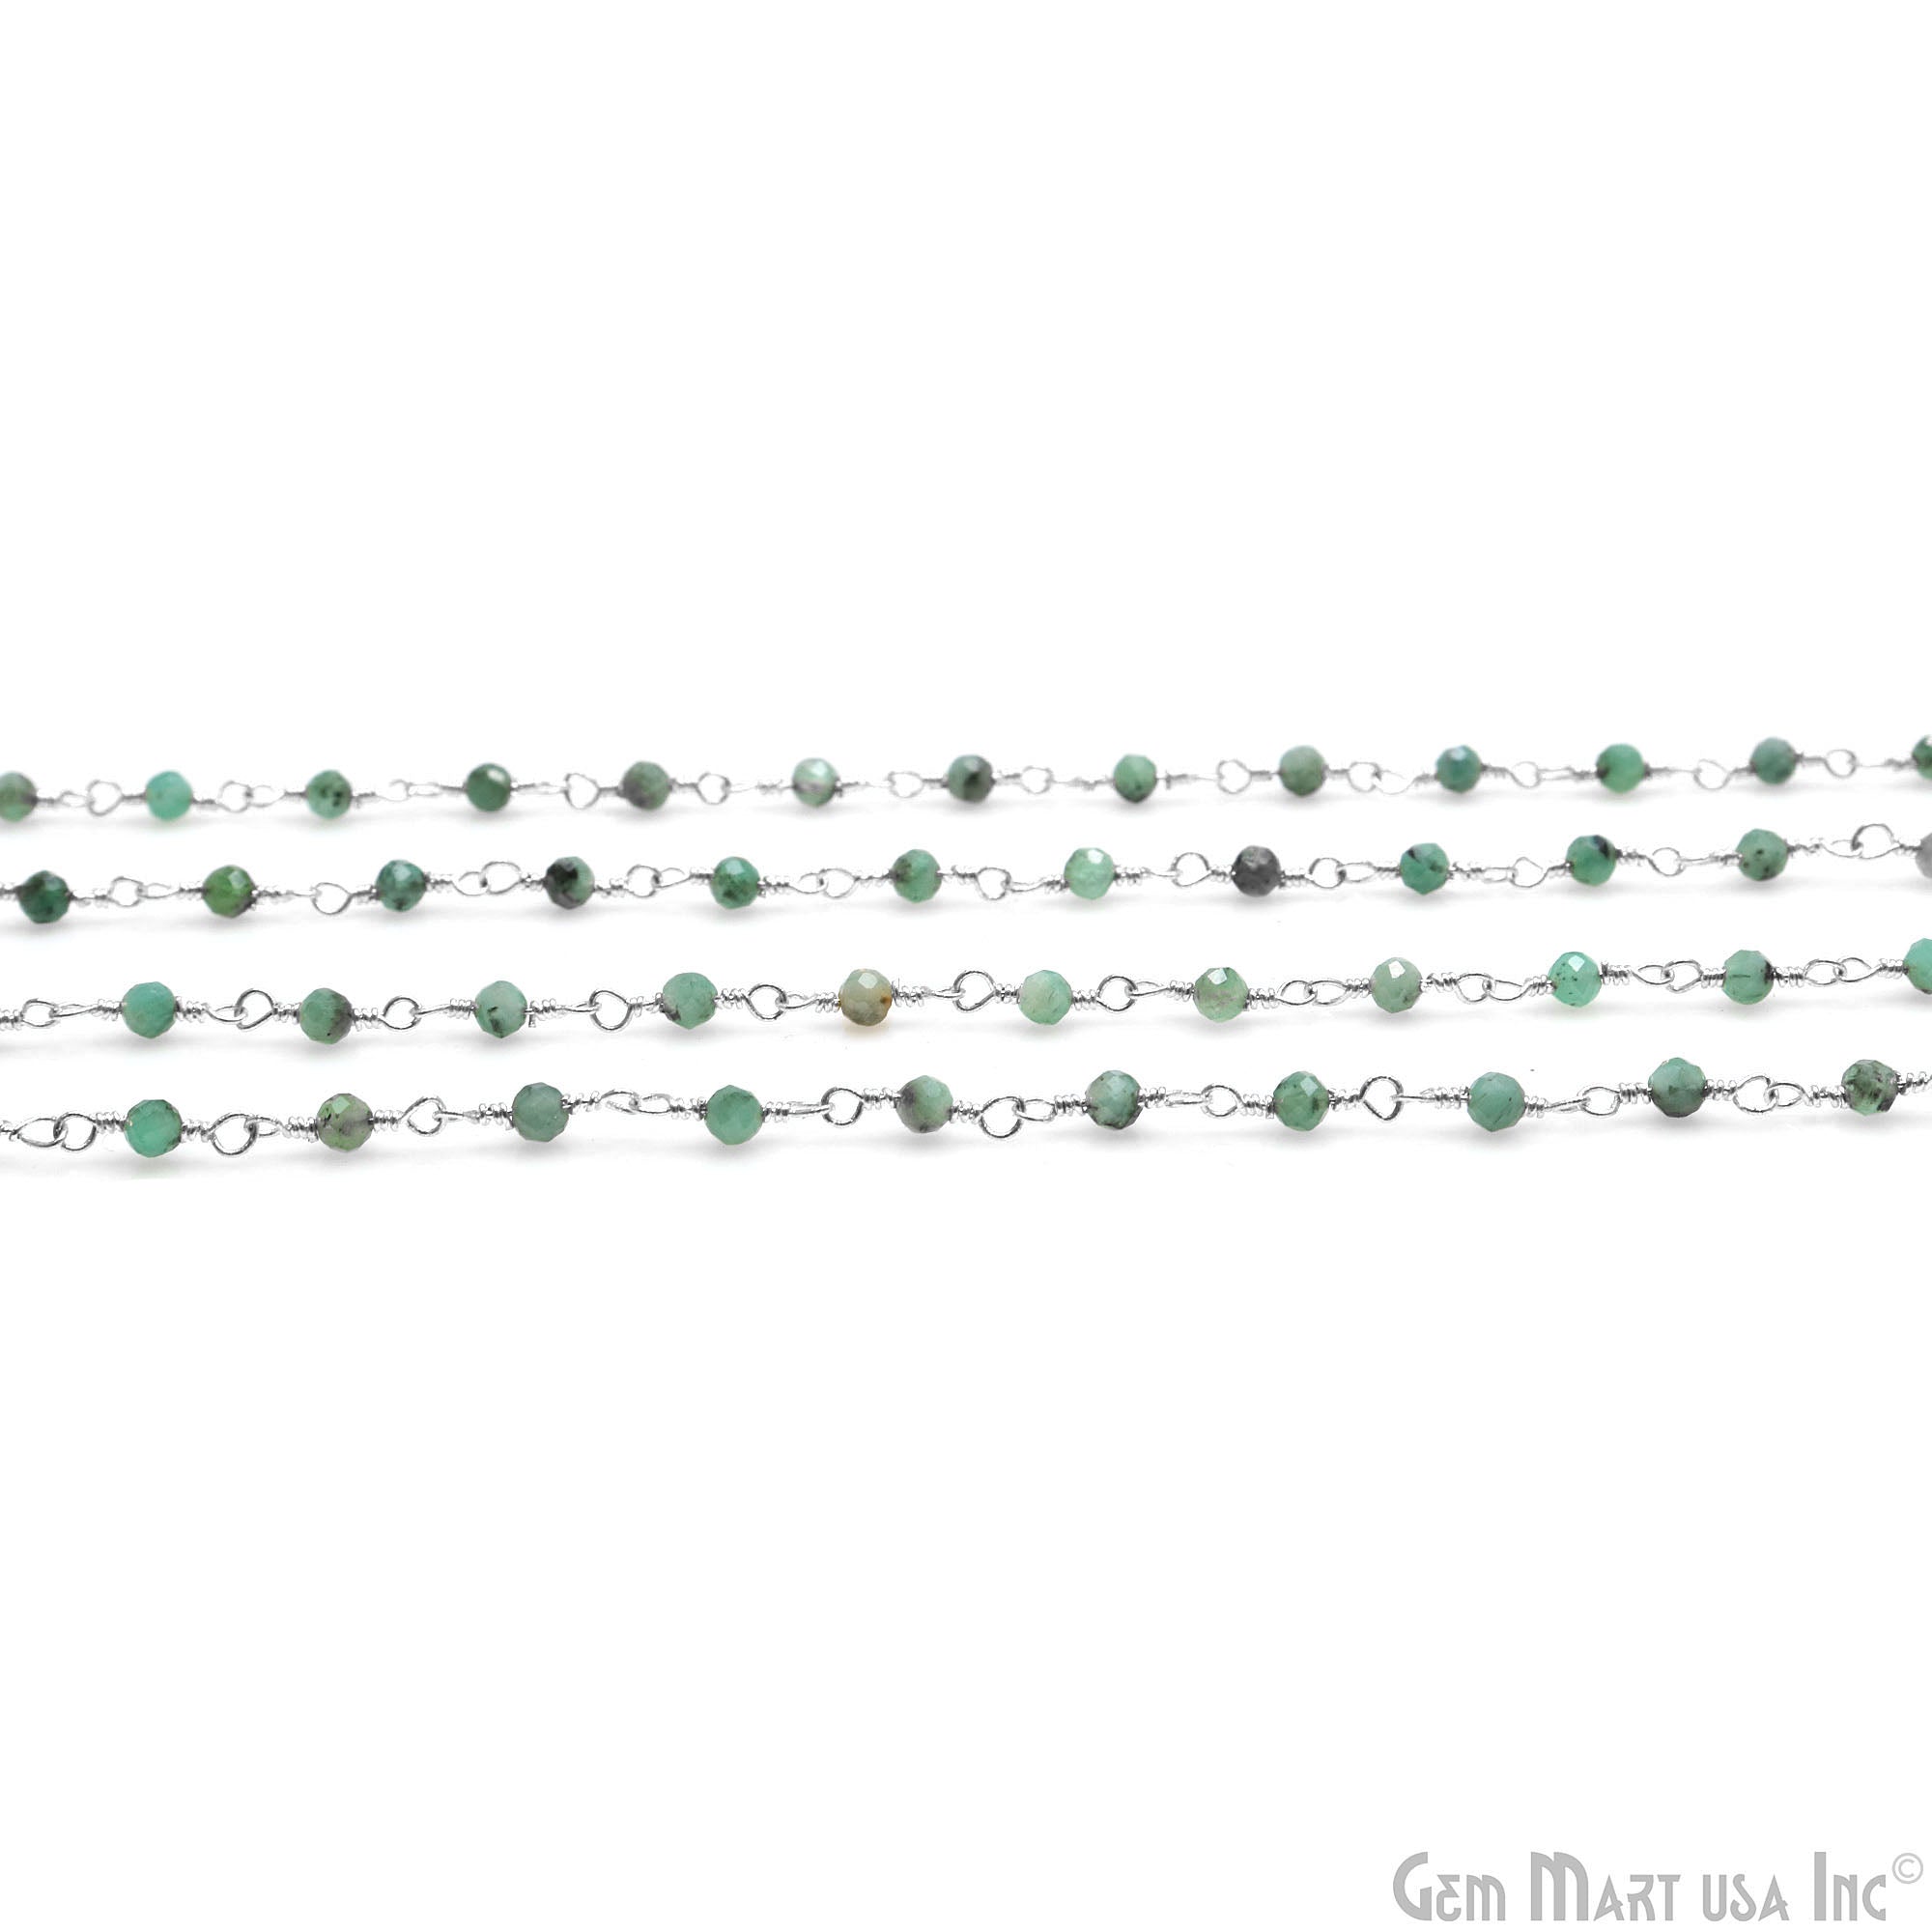 Emerald Faceted 2-2.5mm Tiny Beads Silver Plated Wire Wrapped Rosary Chain